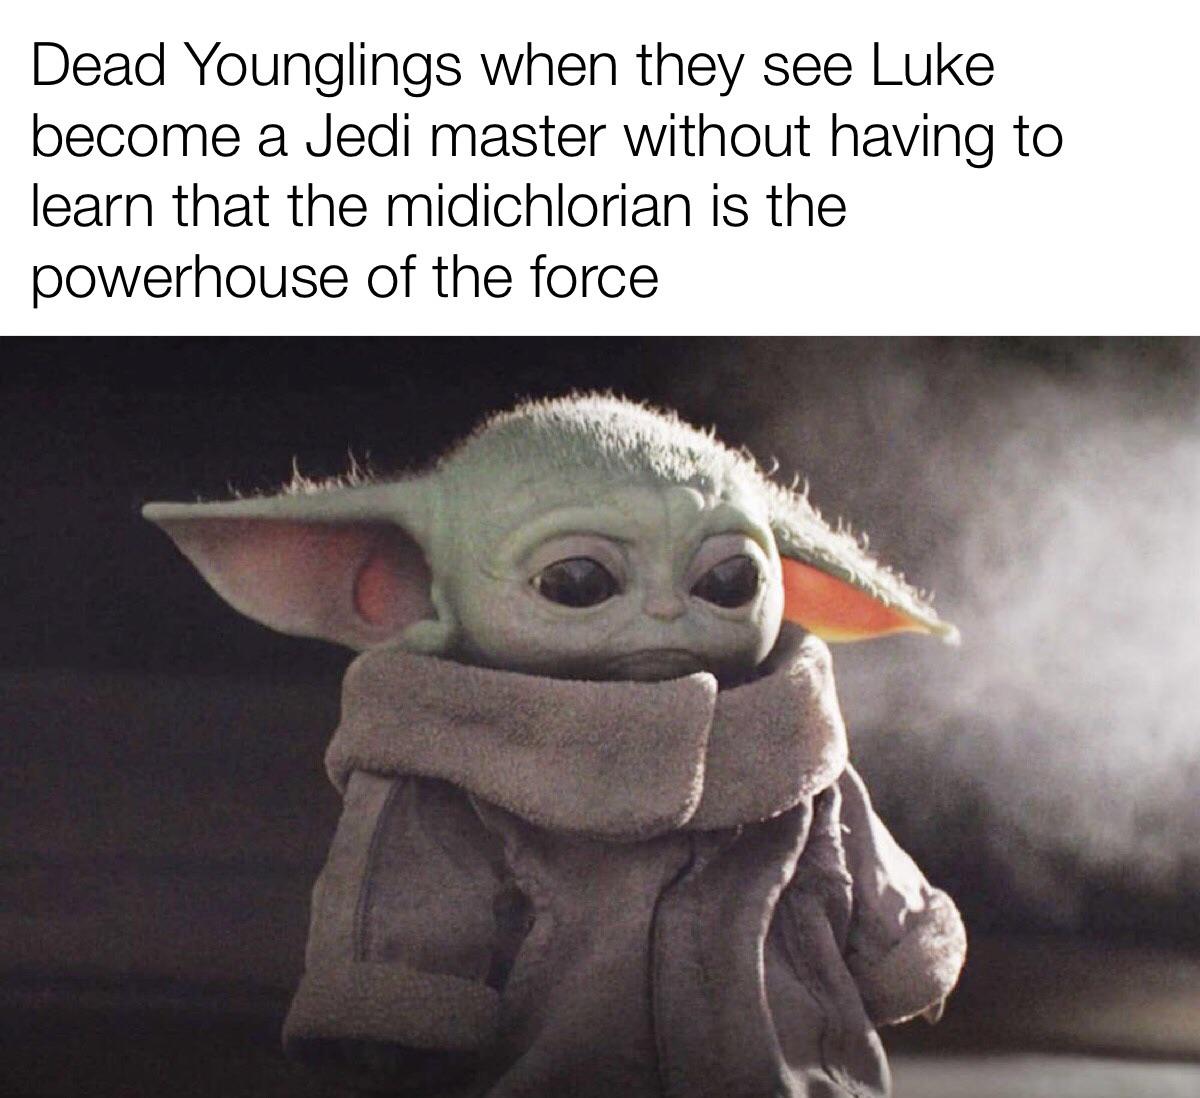 baby yoda sad memes - Dead Younglings when they see Luke become a Jedi master without having to learn that the midichlorian is the powerhouse of the force